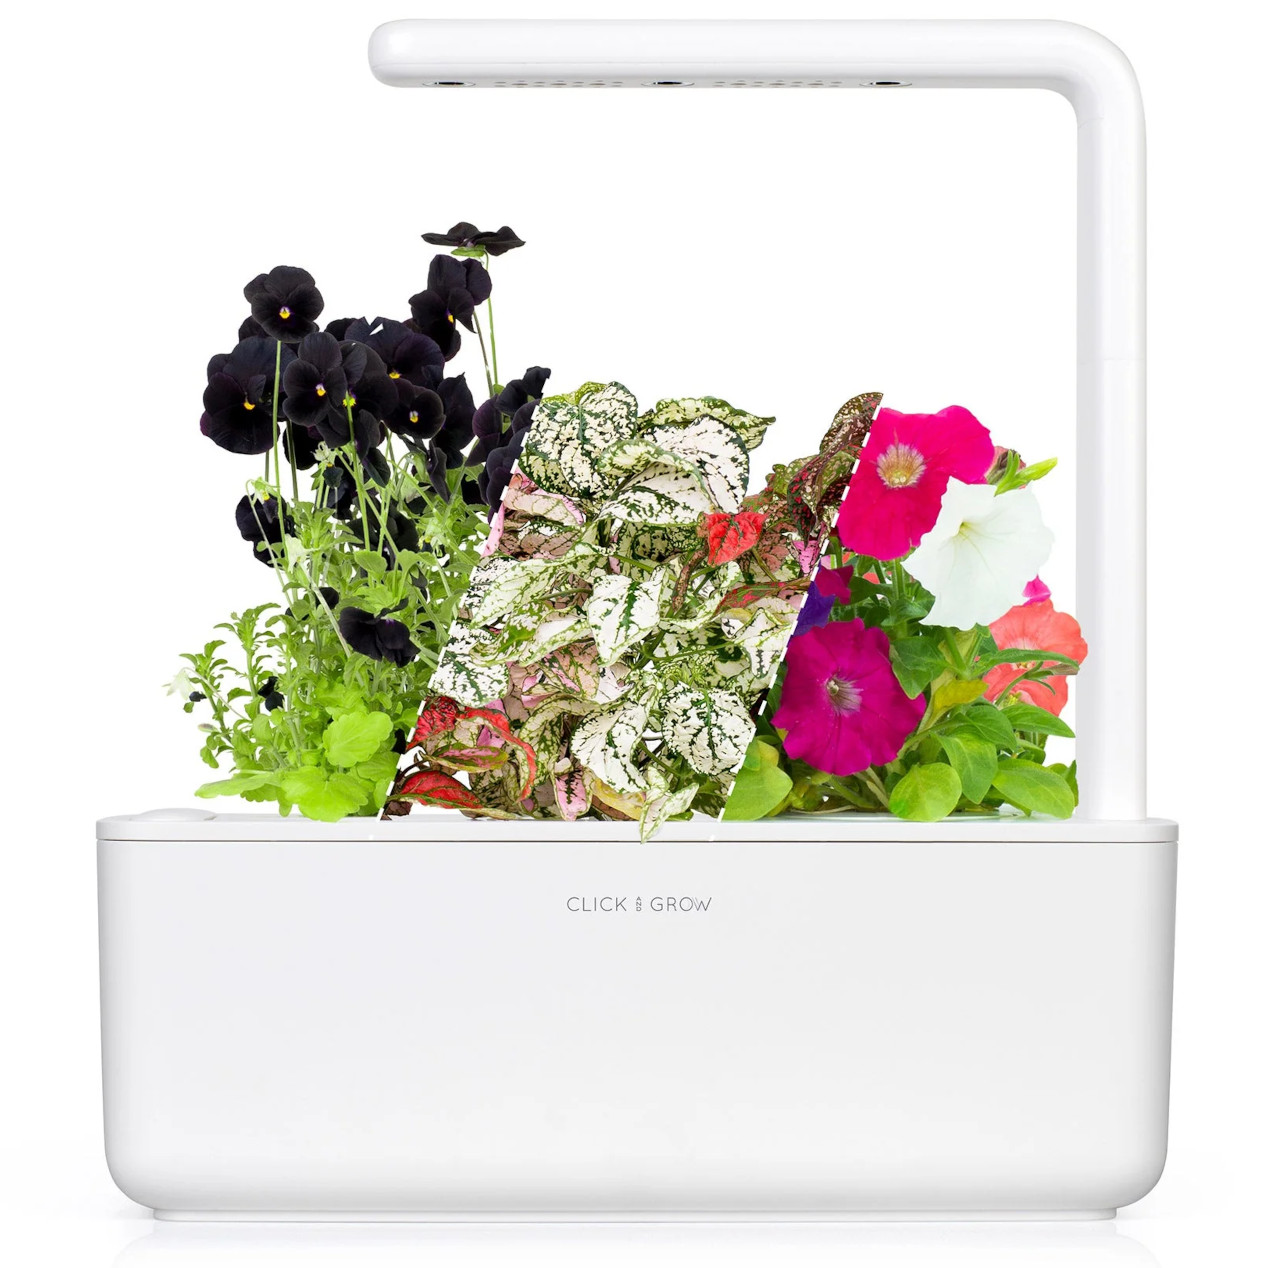 Click & Grow -  Smart Garden 3 with Vibrant Flower Kit with Grow Light and 12 Plant Pods